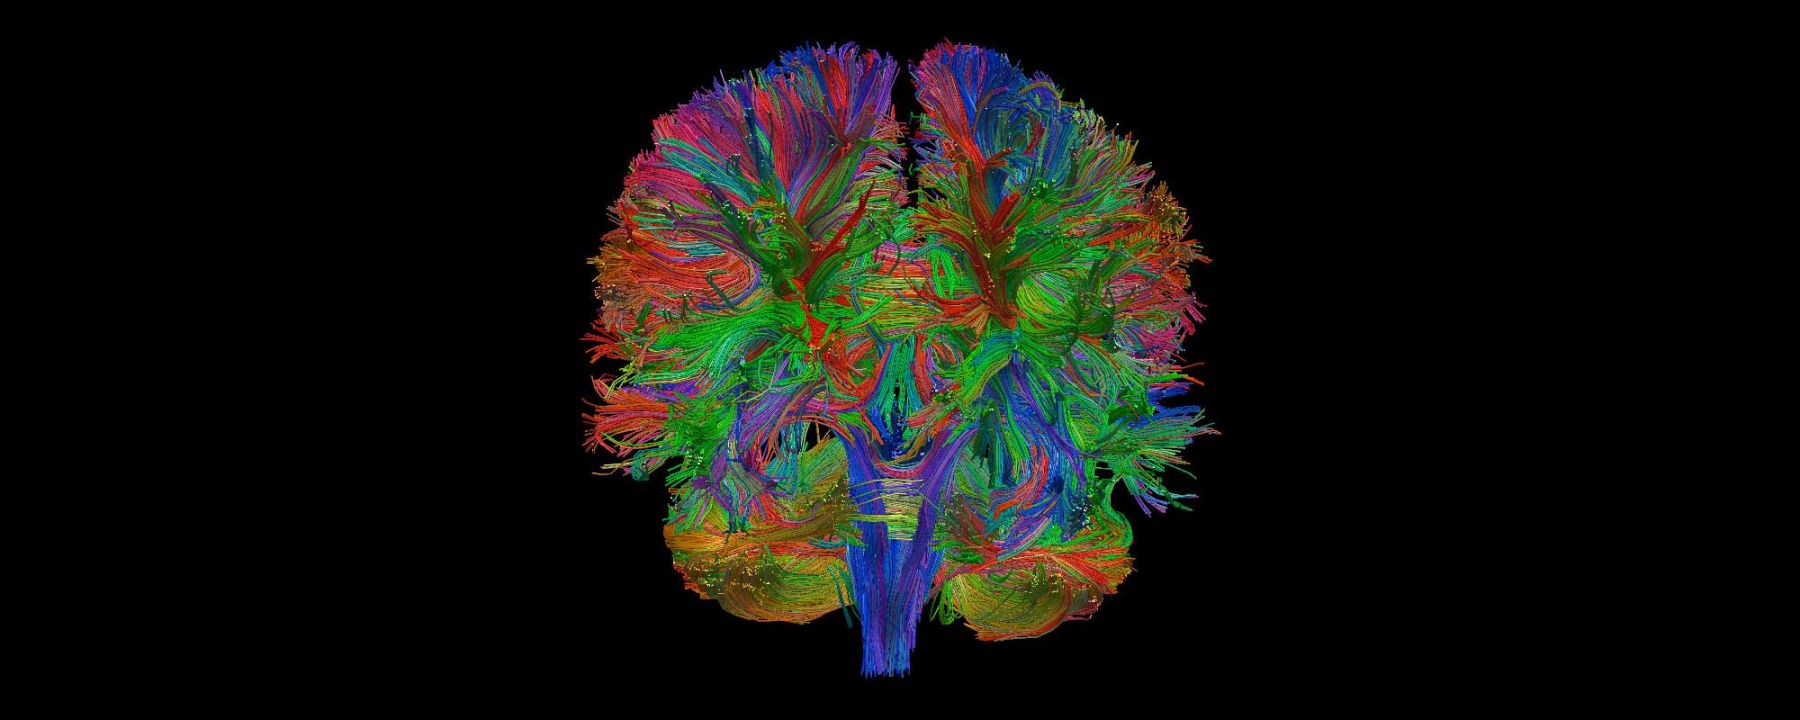 Diffusion Tensor Imaging of whole brain cortico-cortical connectivity in a healthy subject.